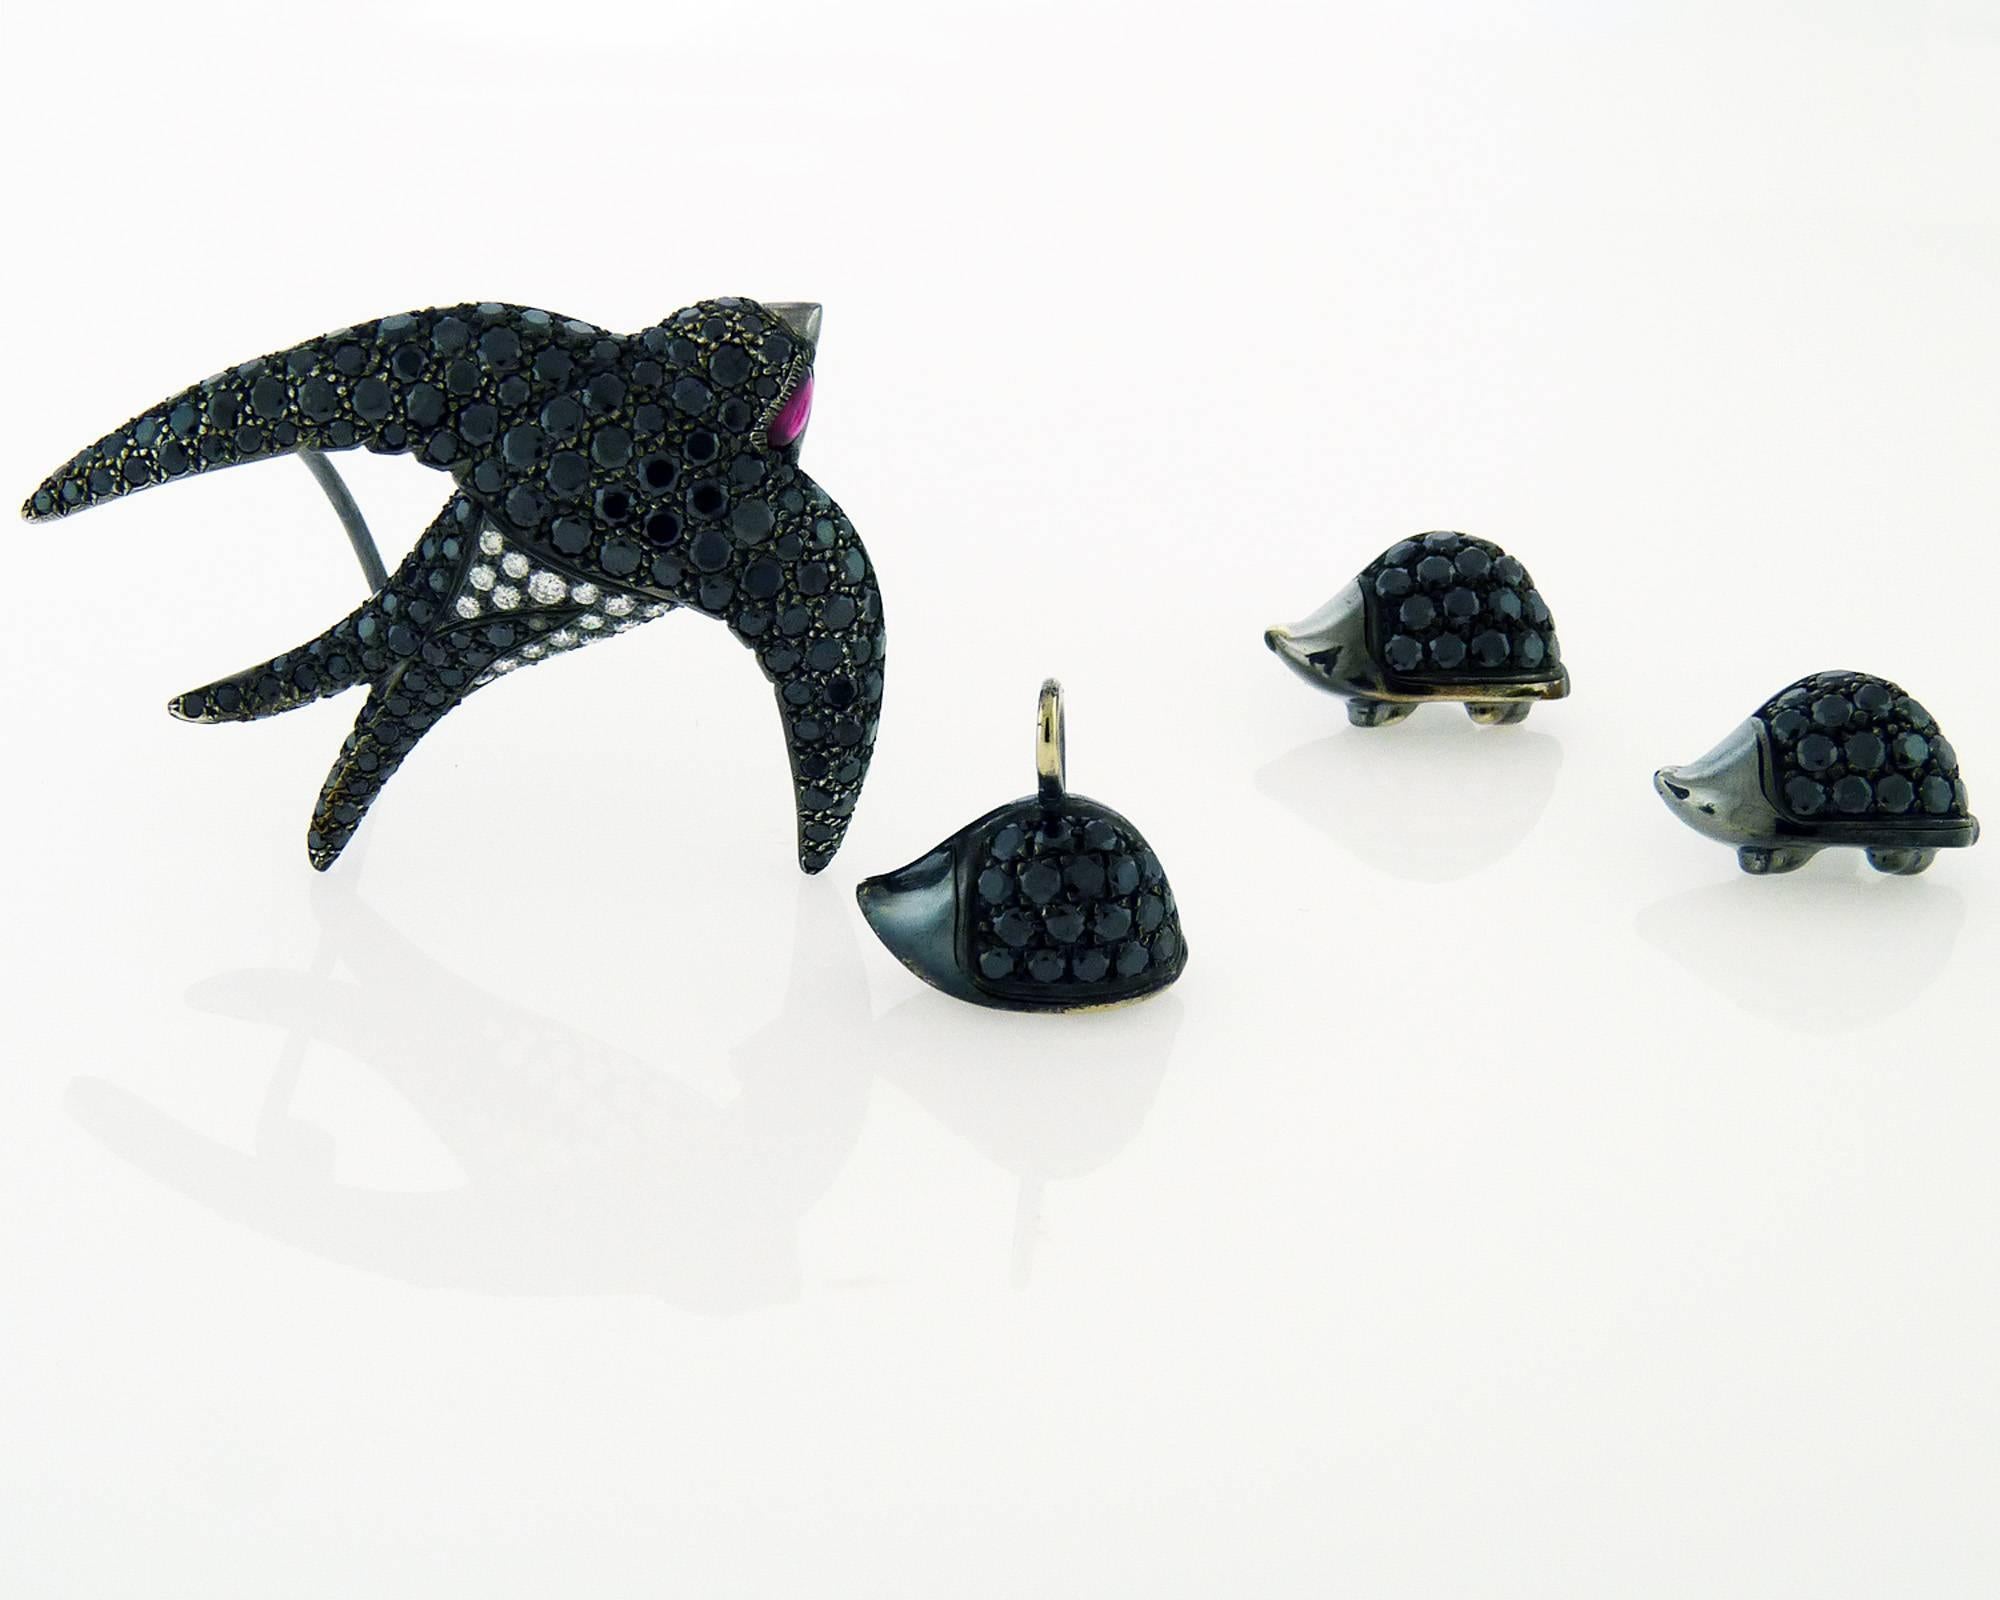 A cute black diamond earrings, pendant, and brooch set, by De Grisogono.
The set consists of hedgehog design earrings and pendant,  and a seagull brooch.
The earrings and pendent are set with black diamonds in rhodium black gold on top of silver.